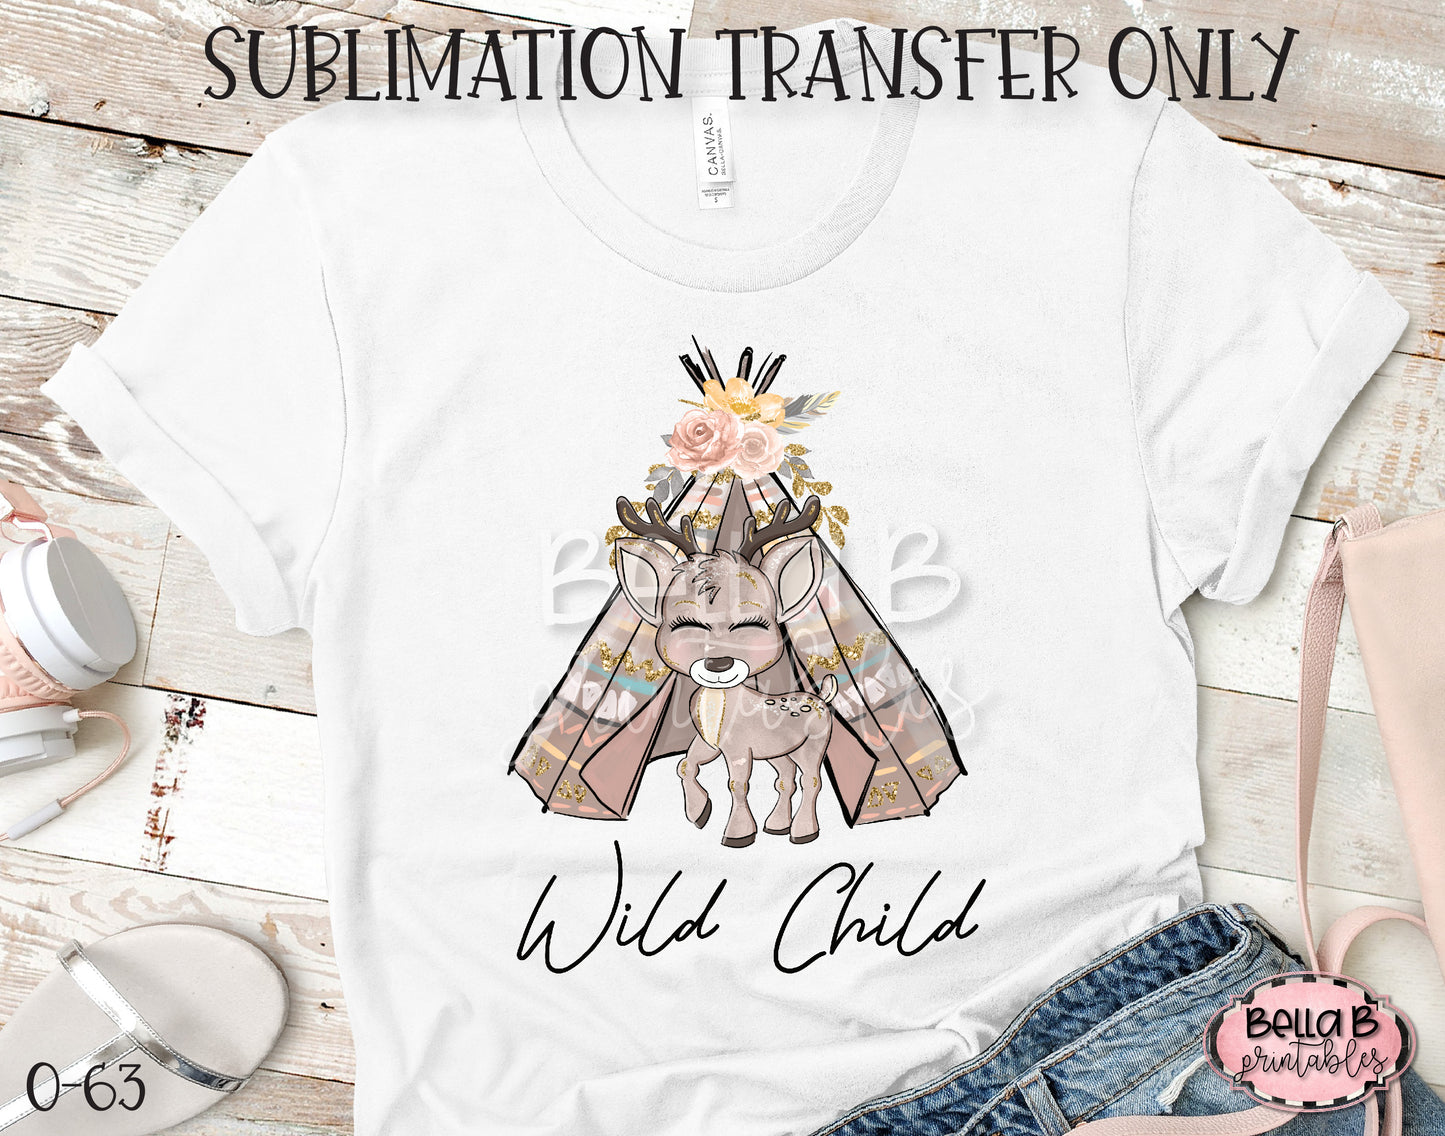 Wild Child Sublimation Transfer, Ready To Press, Heat Press Transfer, Sublimation Print